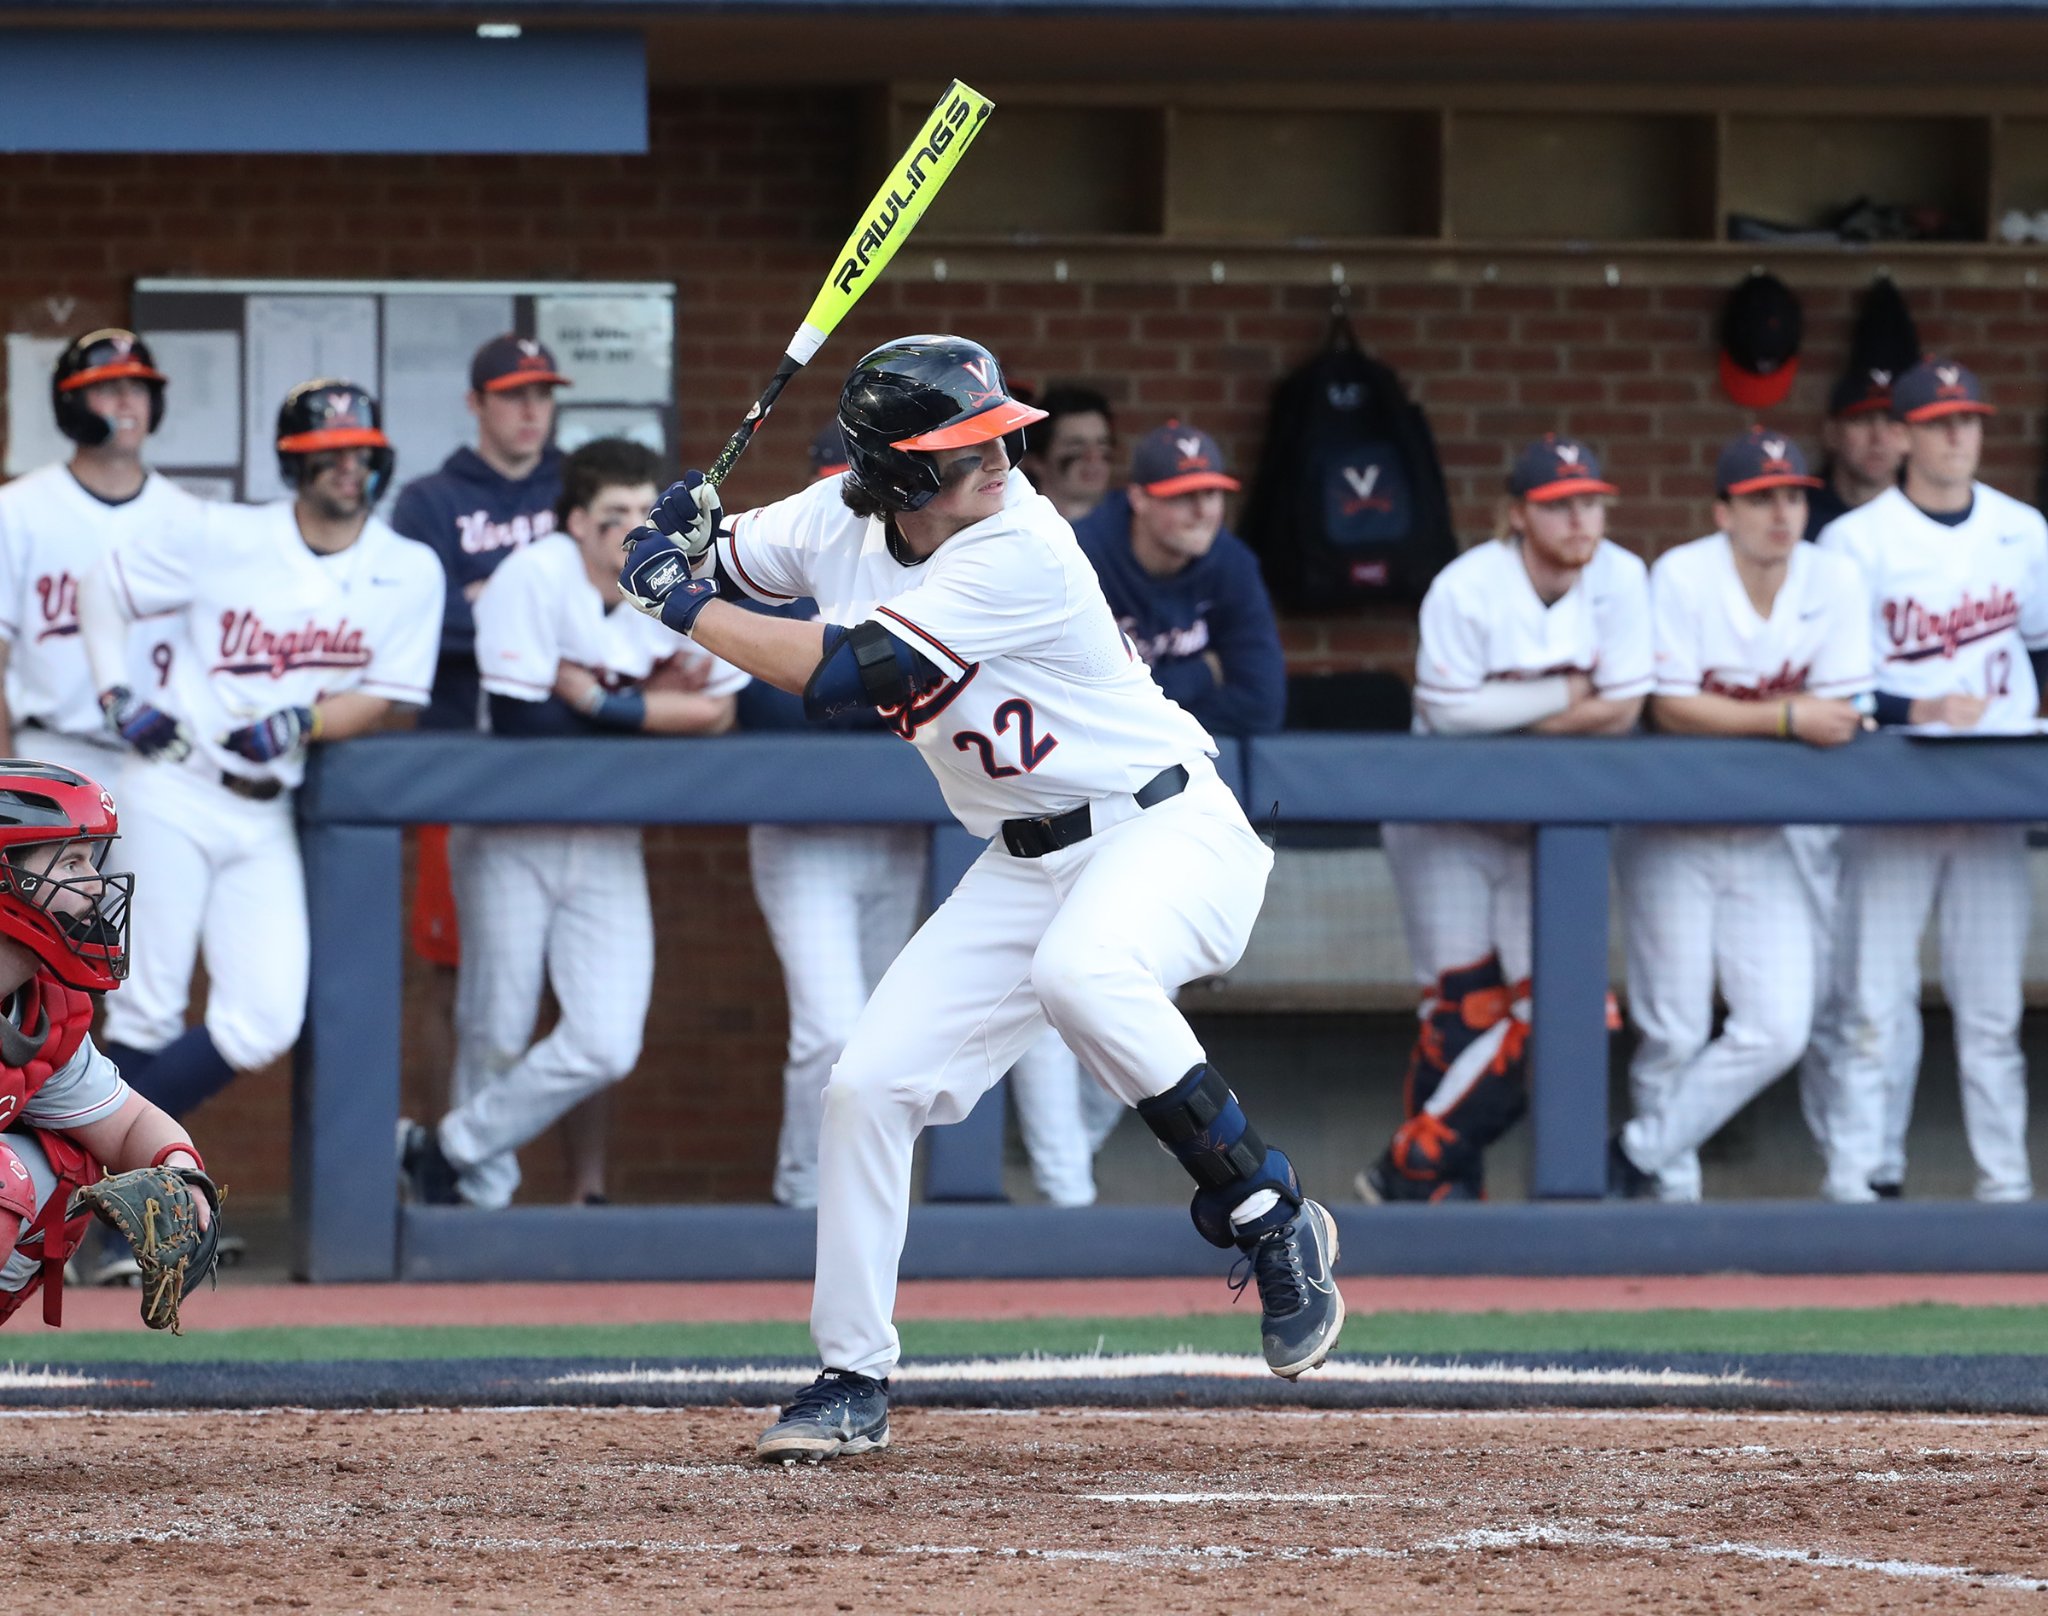 Jake Gelof Hits for the Cycle in Virginia's 19-1 Win Over Cornell - CalBearsMaven